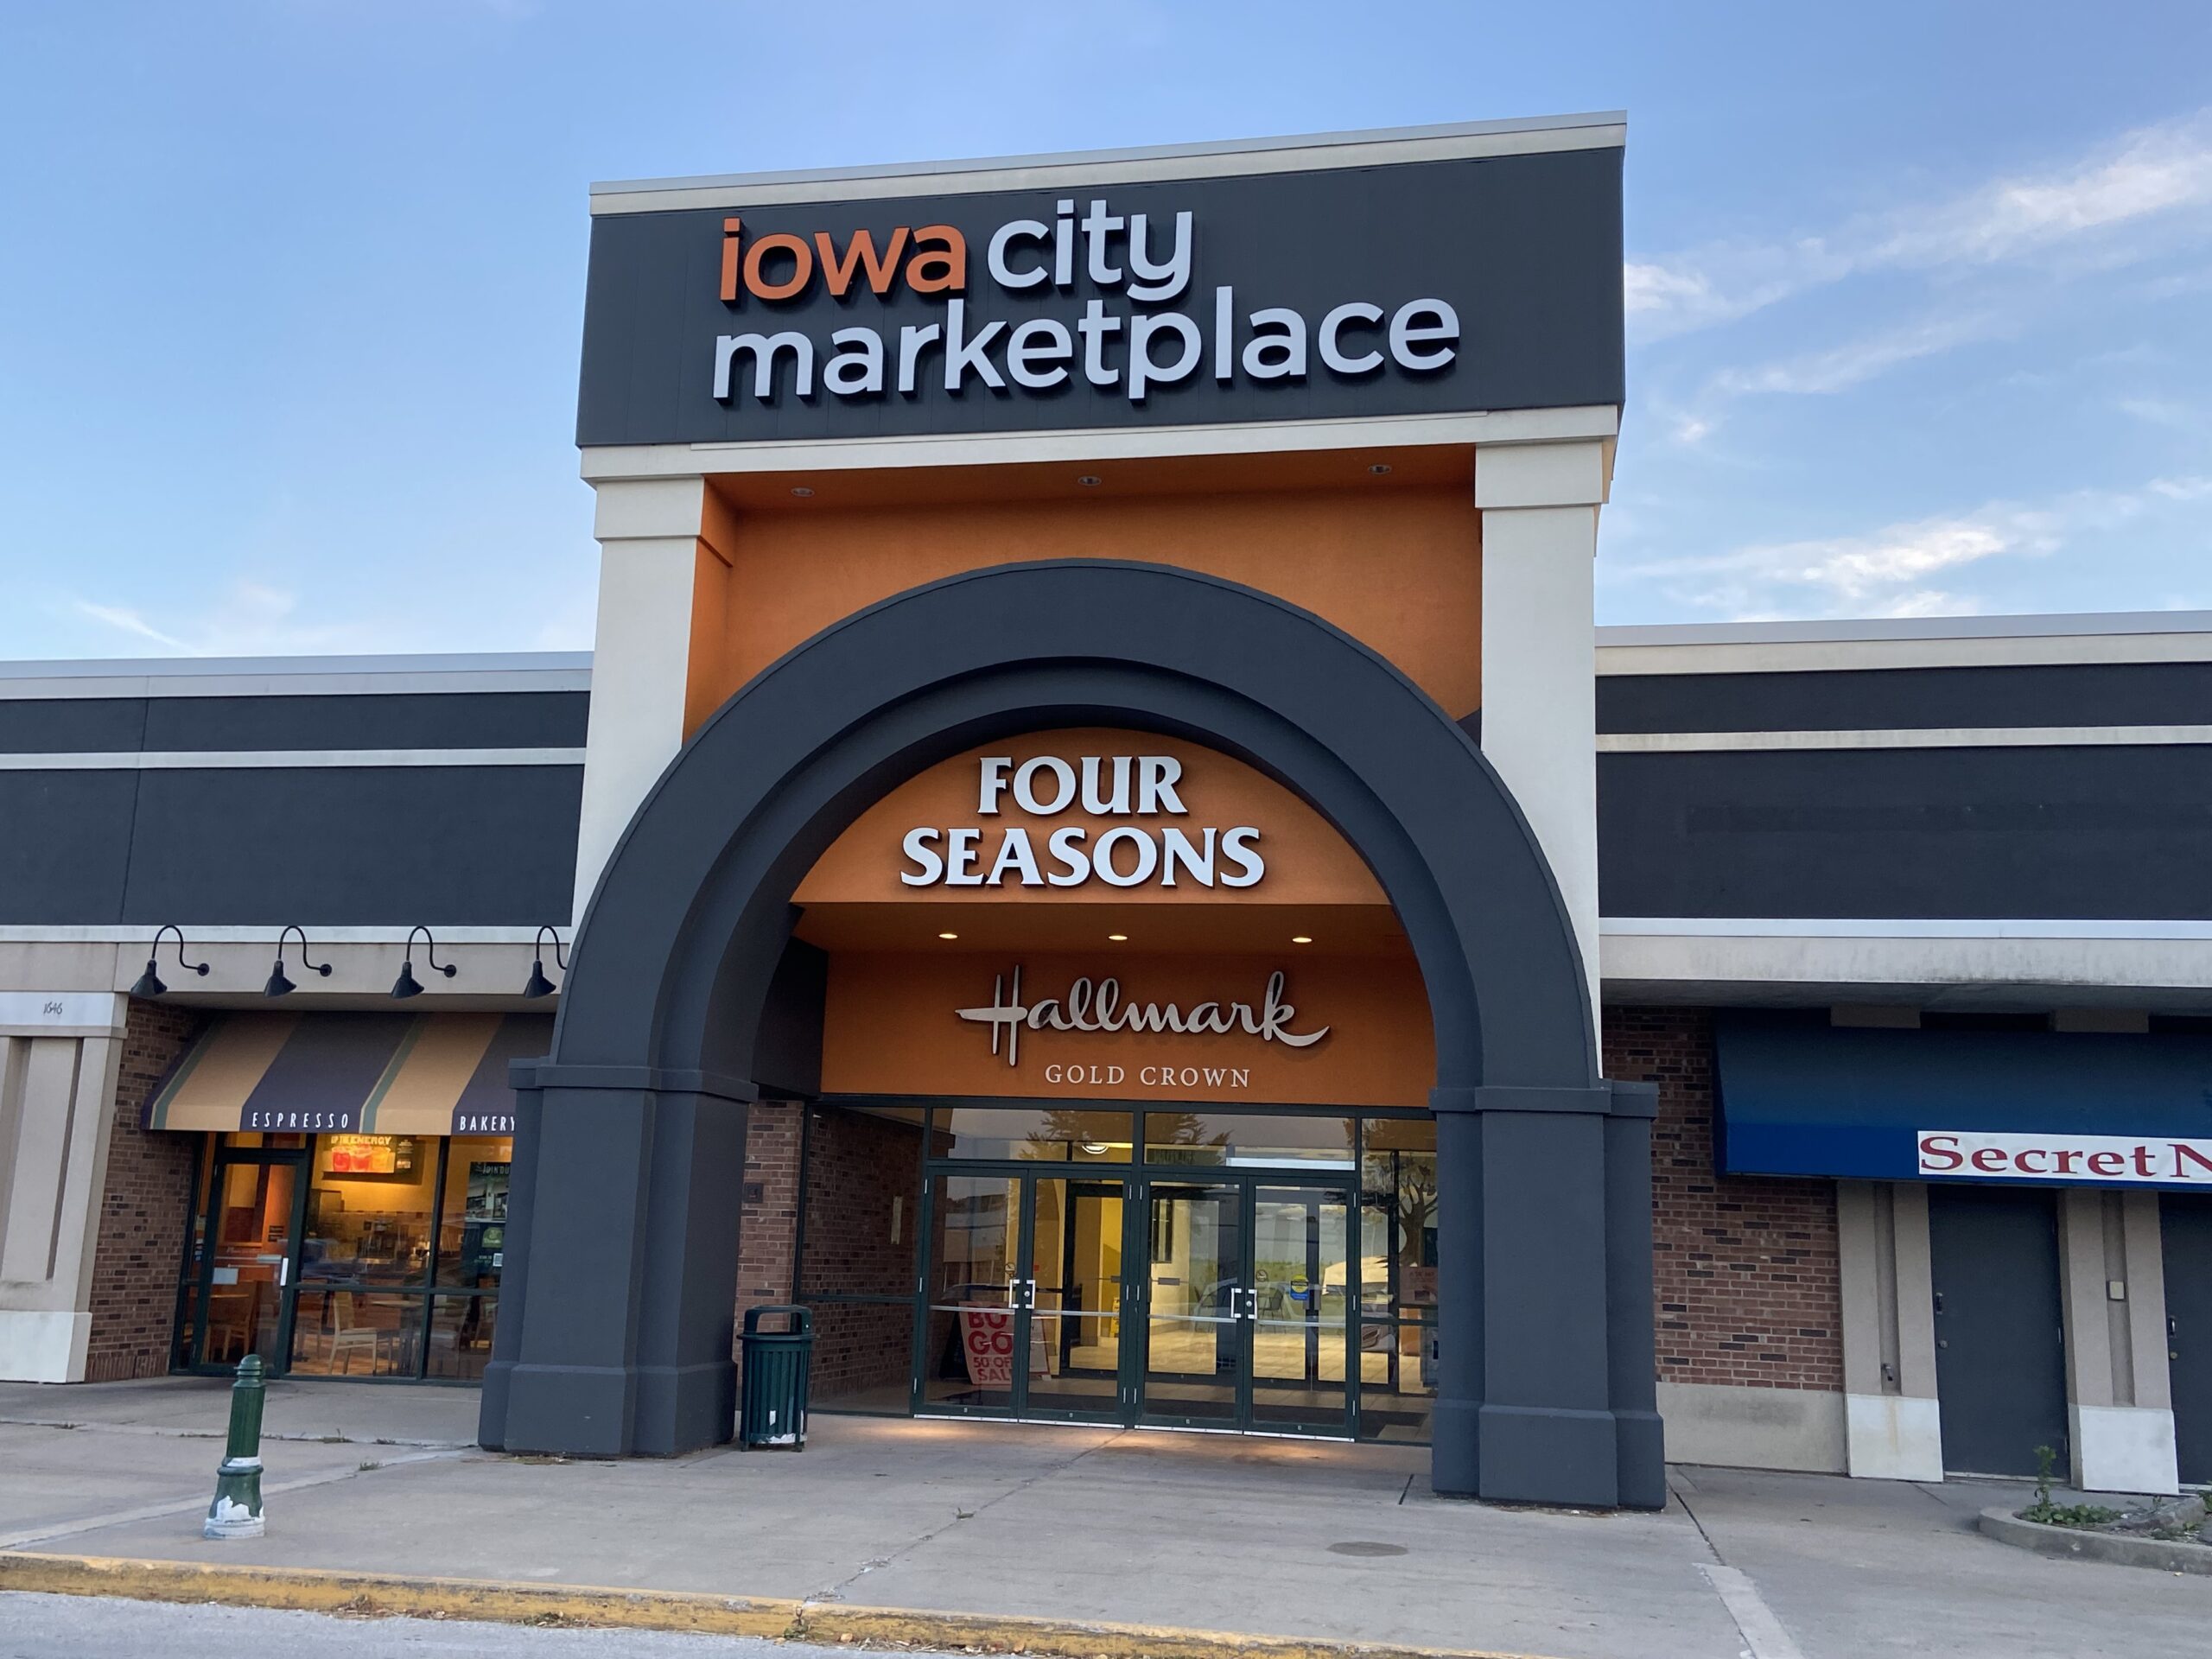 Brookwood Capital Advisors is selling the Iowa City Marketplace in auction next month. CREDIT NOAH TONG